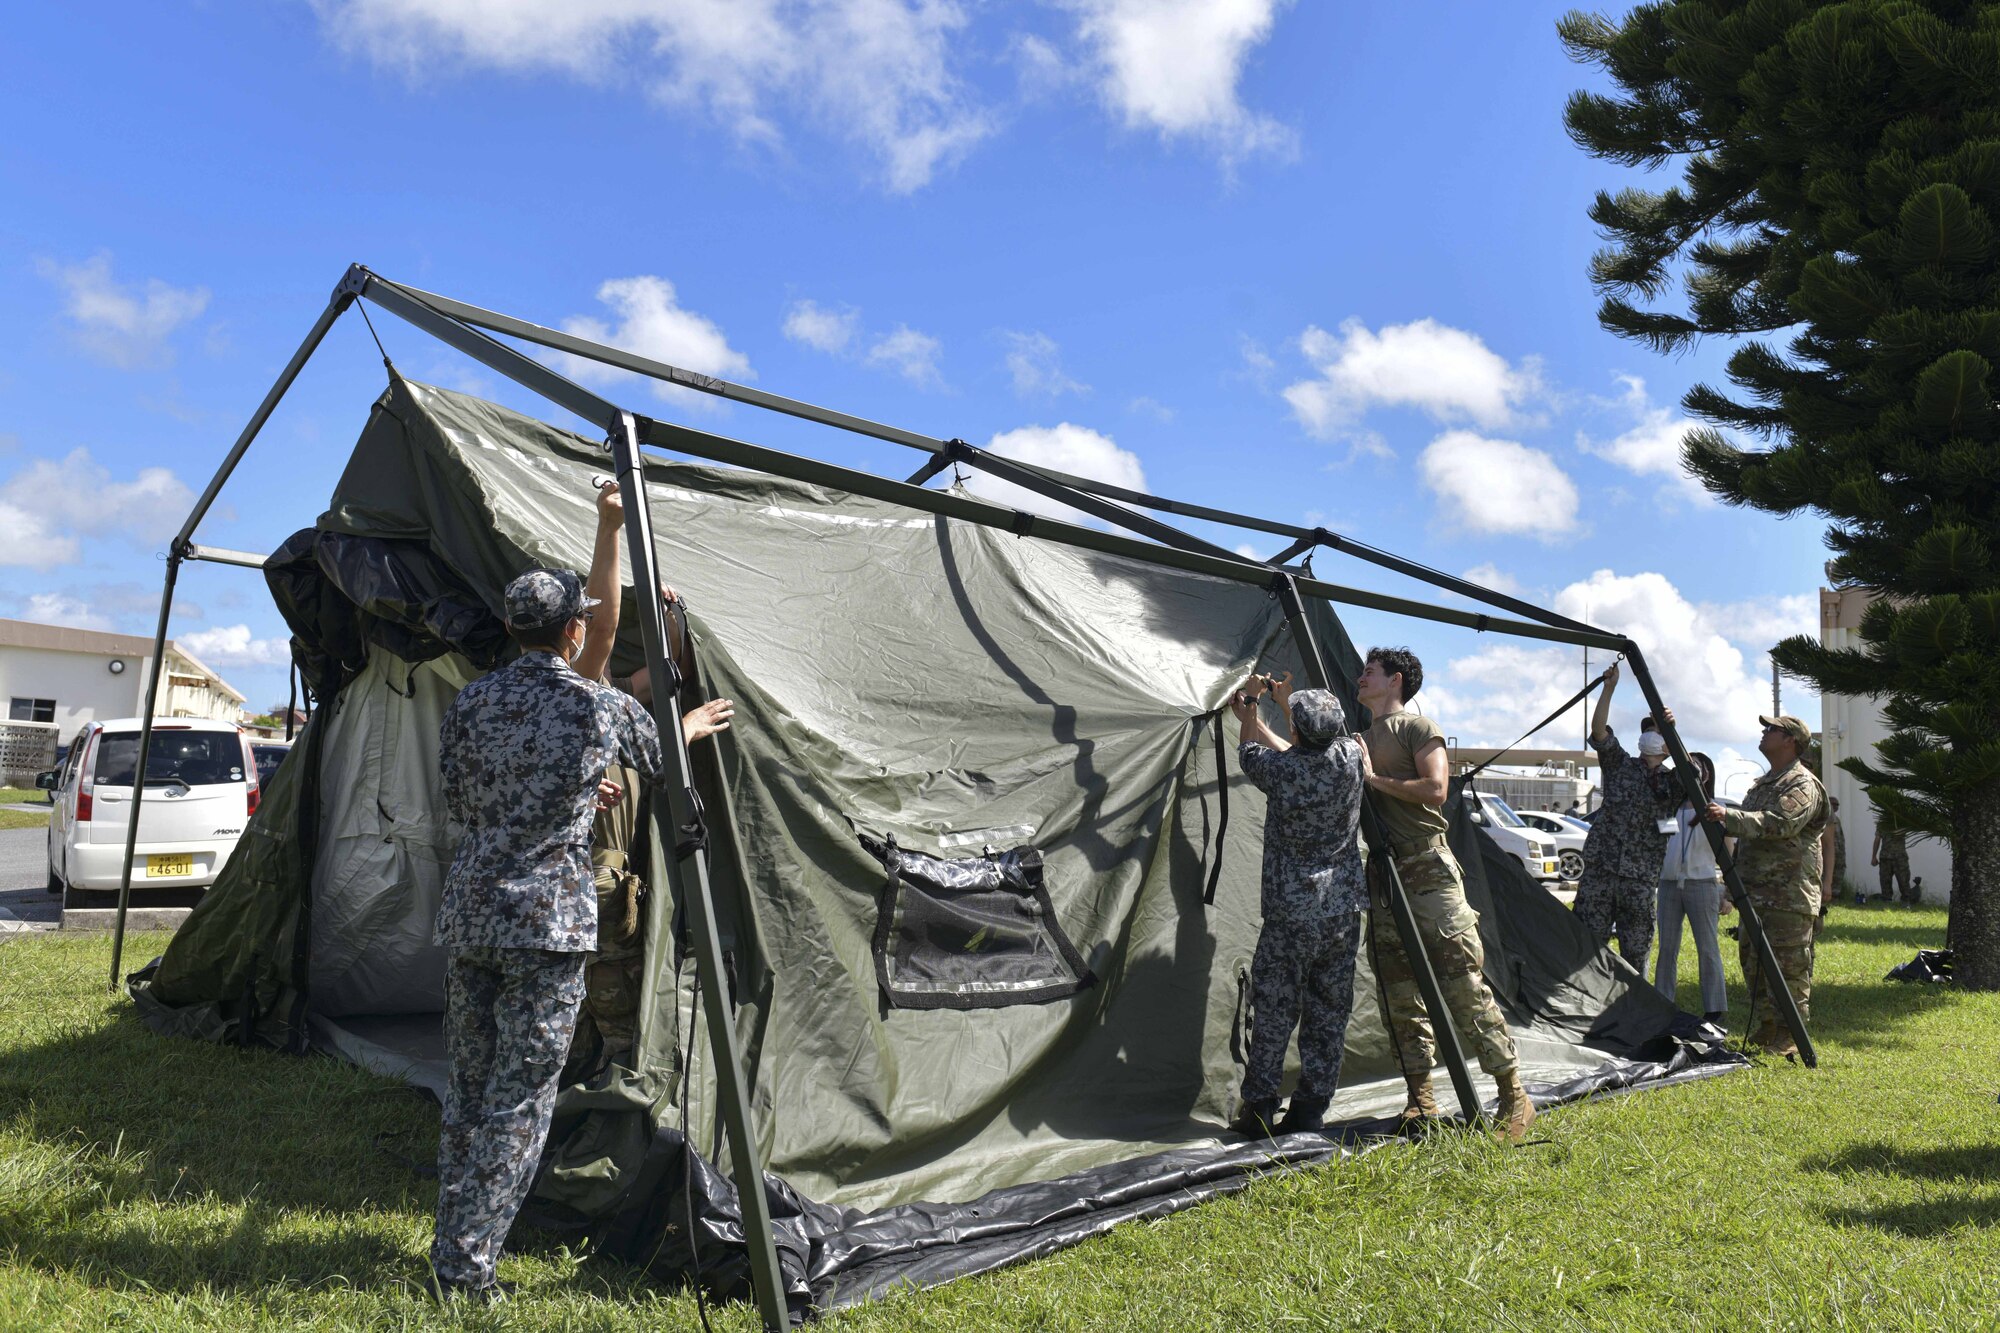 A group of Japanese and American military personnel work together to setup a tent